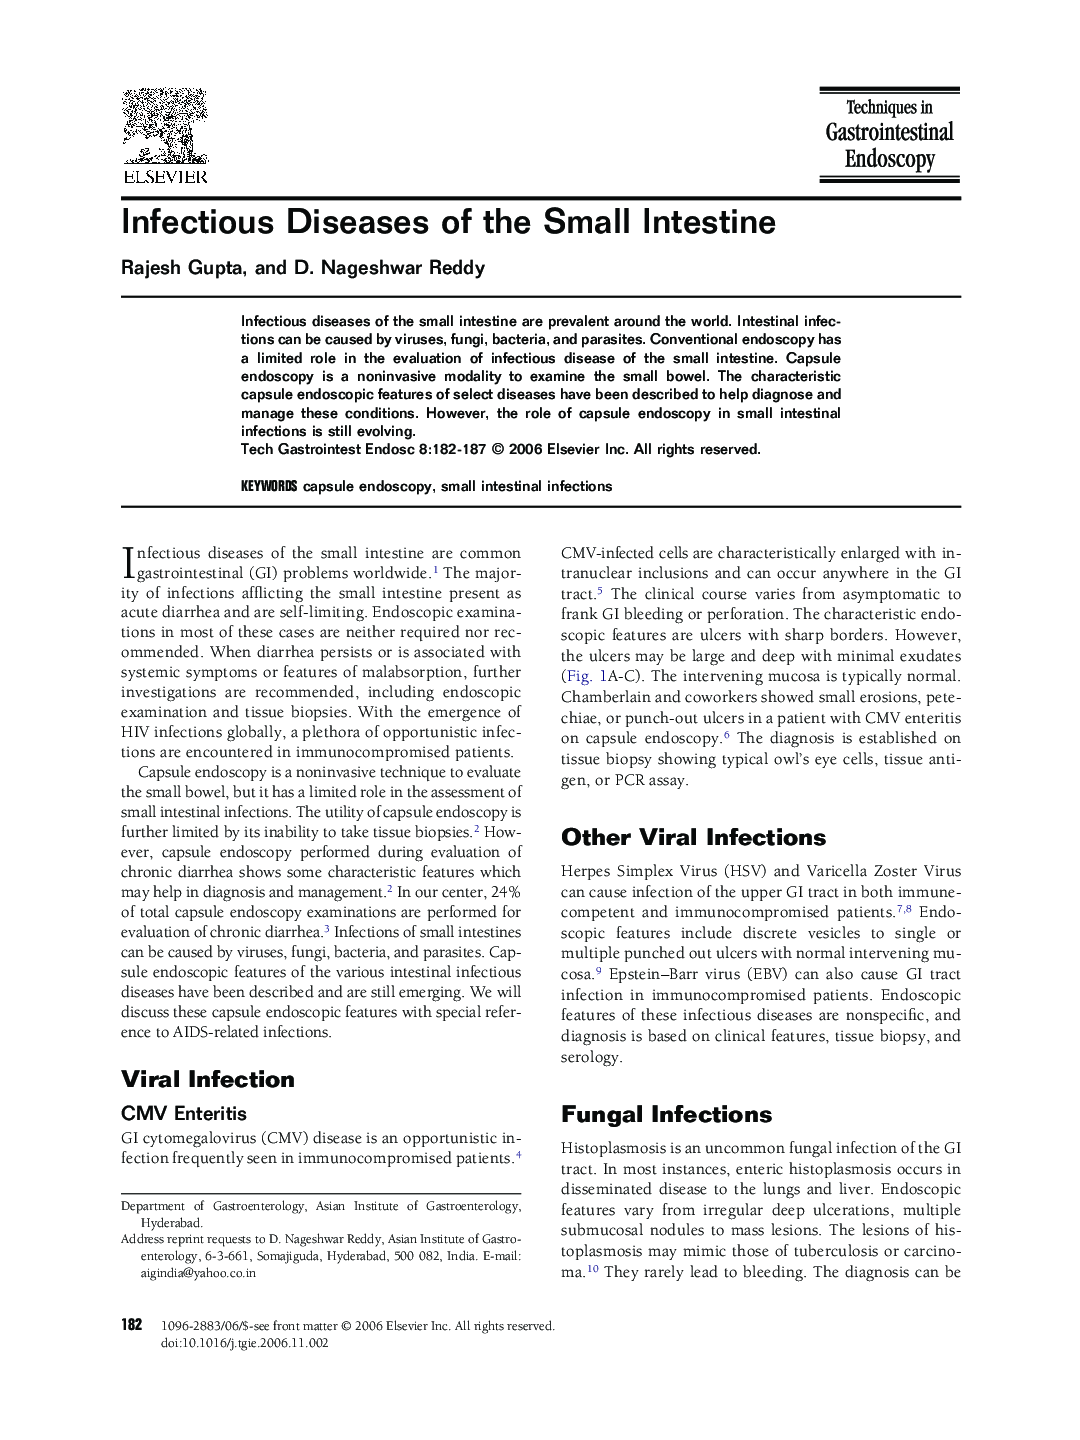 Infectious Diseases of the Small Intestine